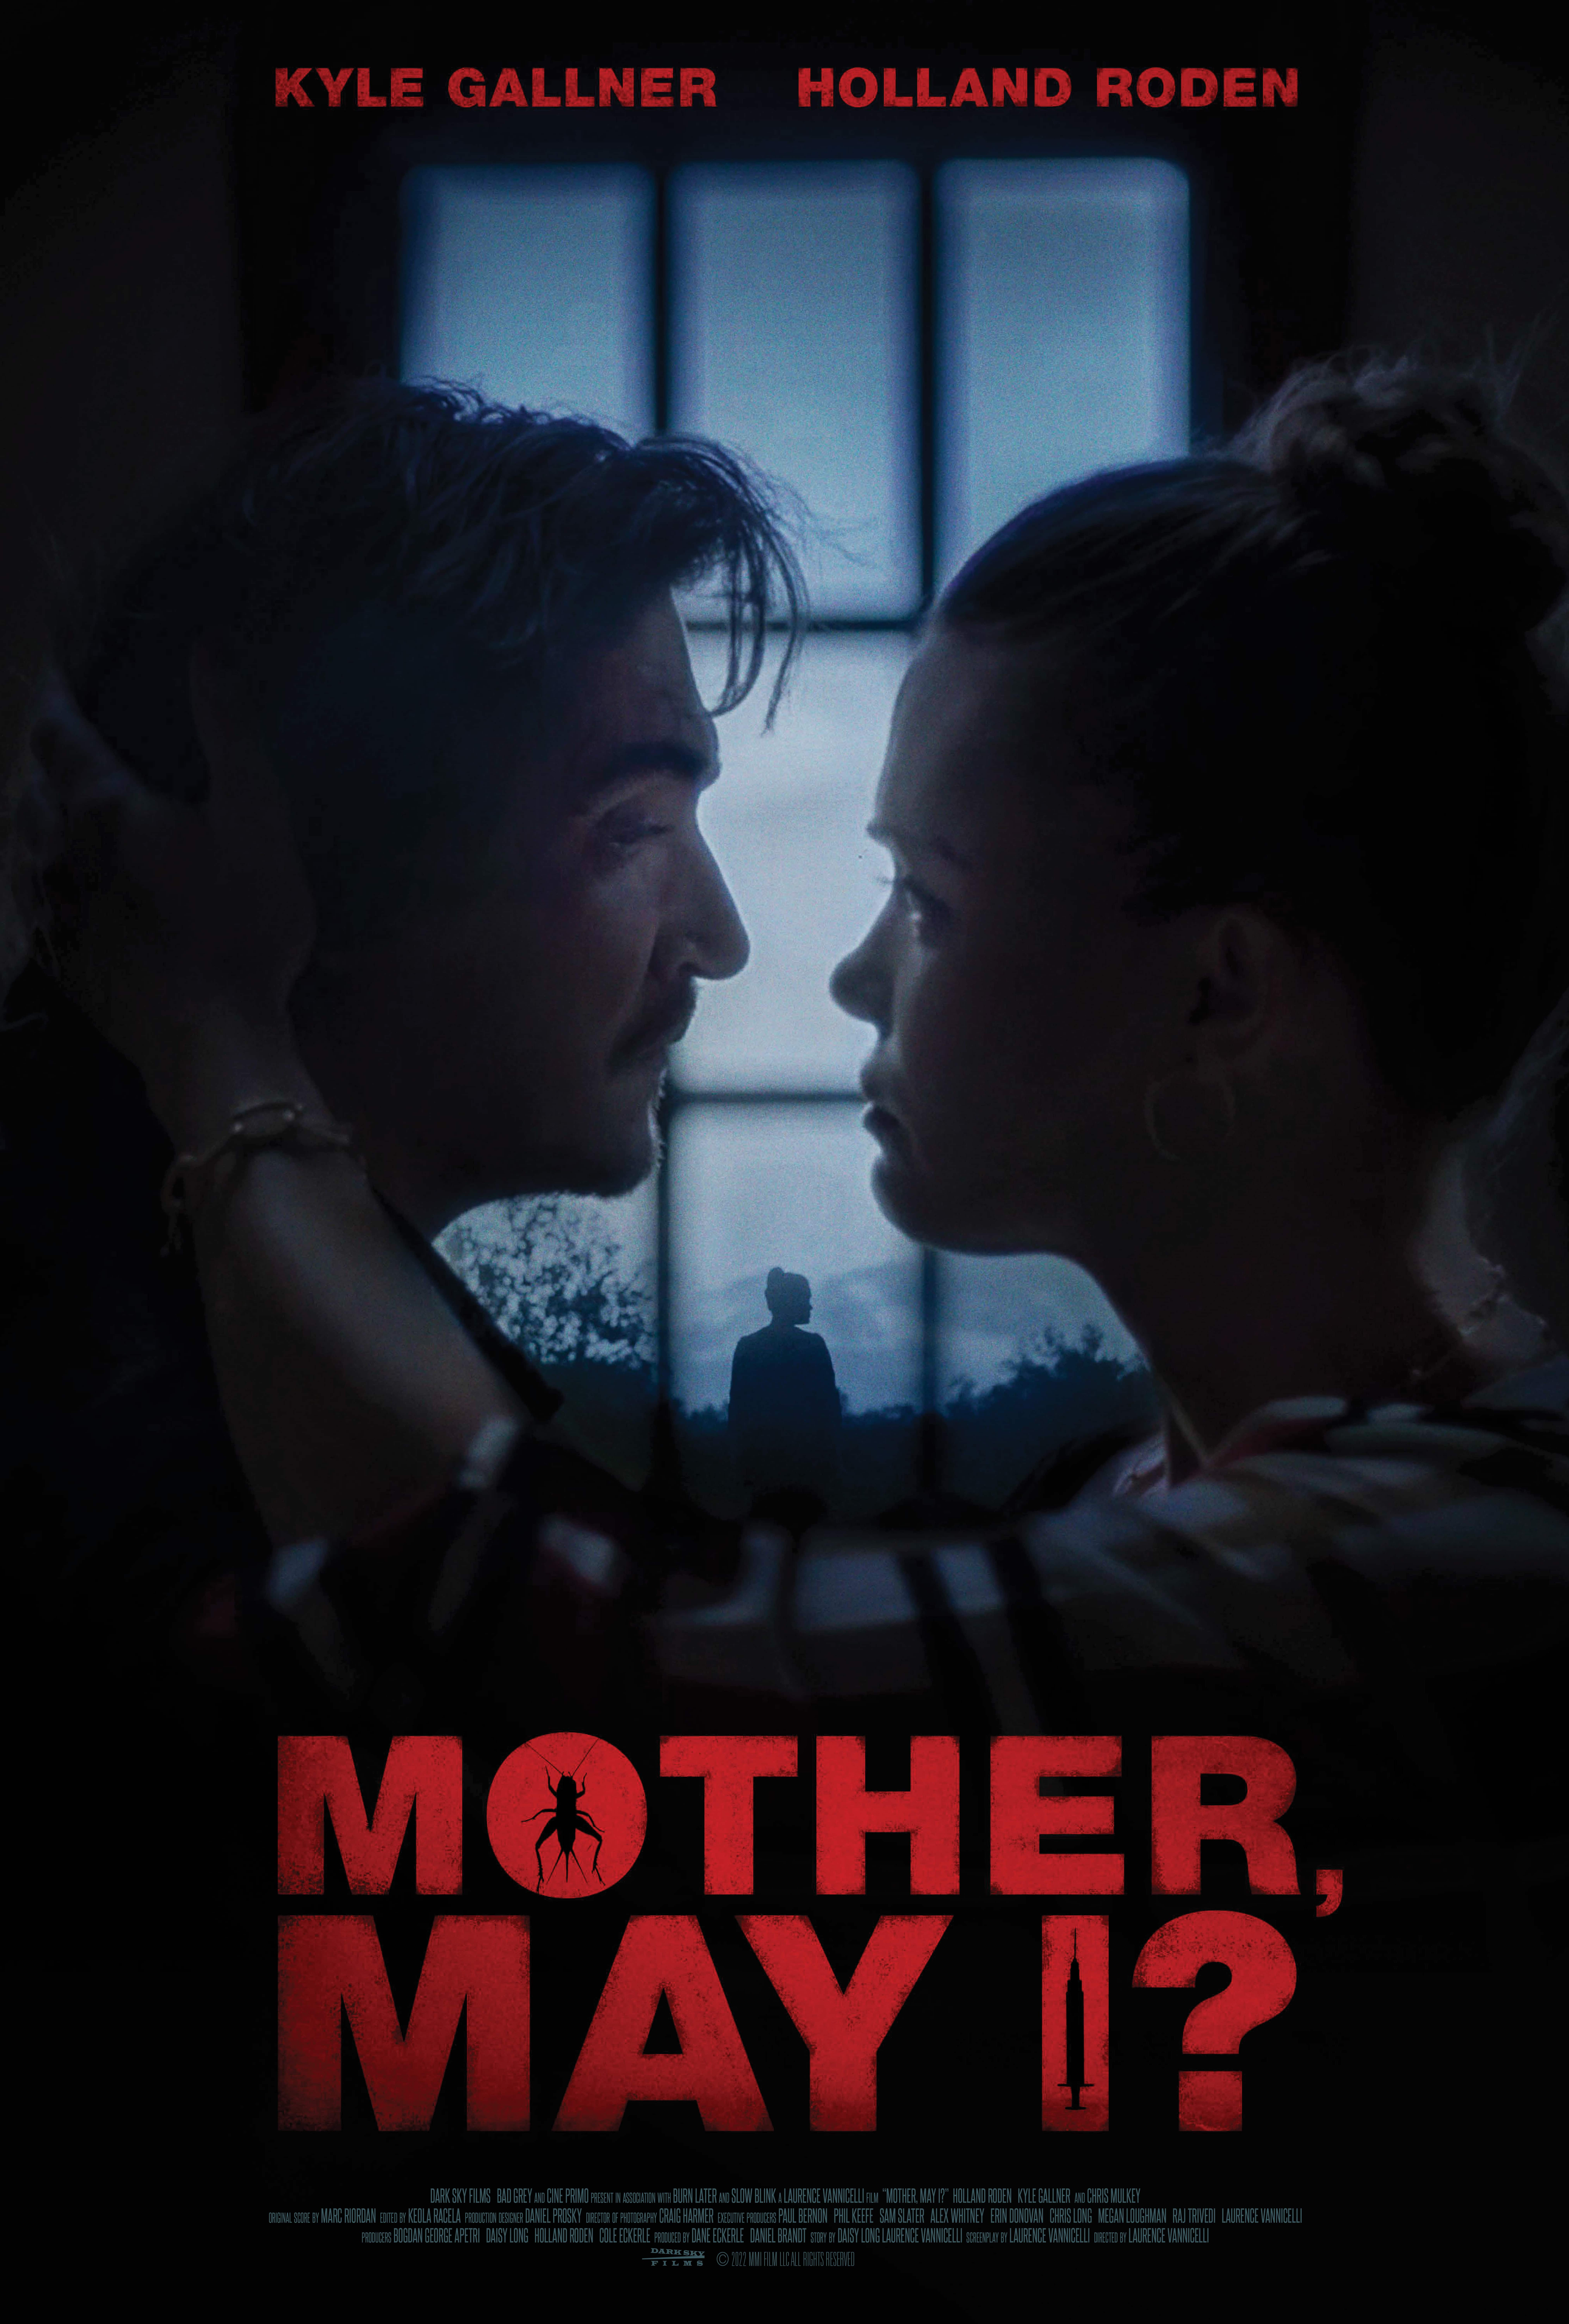 Mother, May I? - A Spine-Chilling Thriller Arriving Soon 30